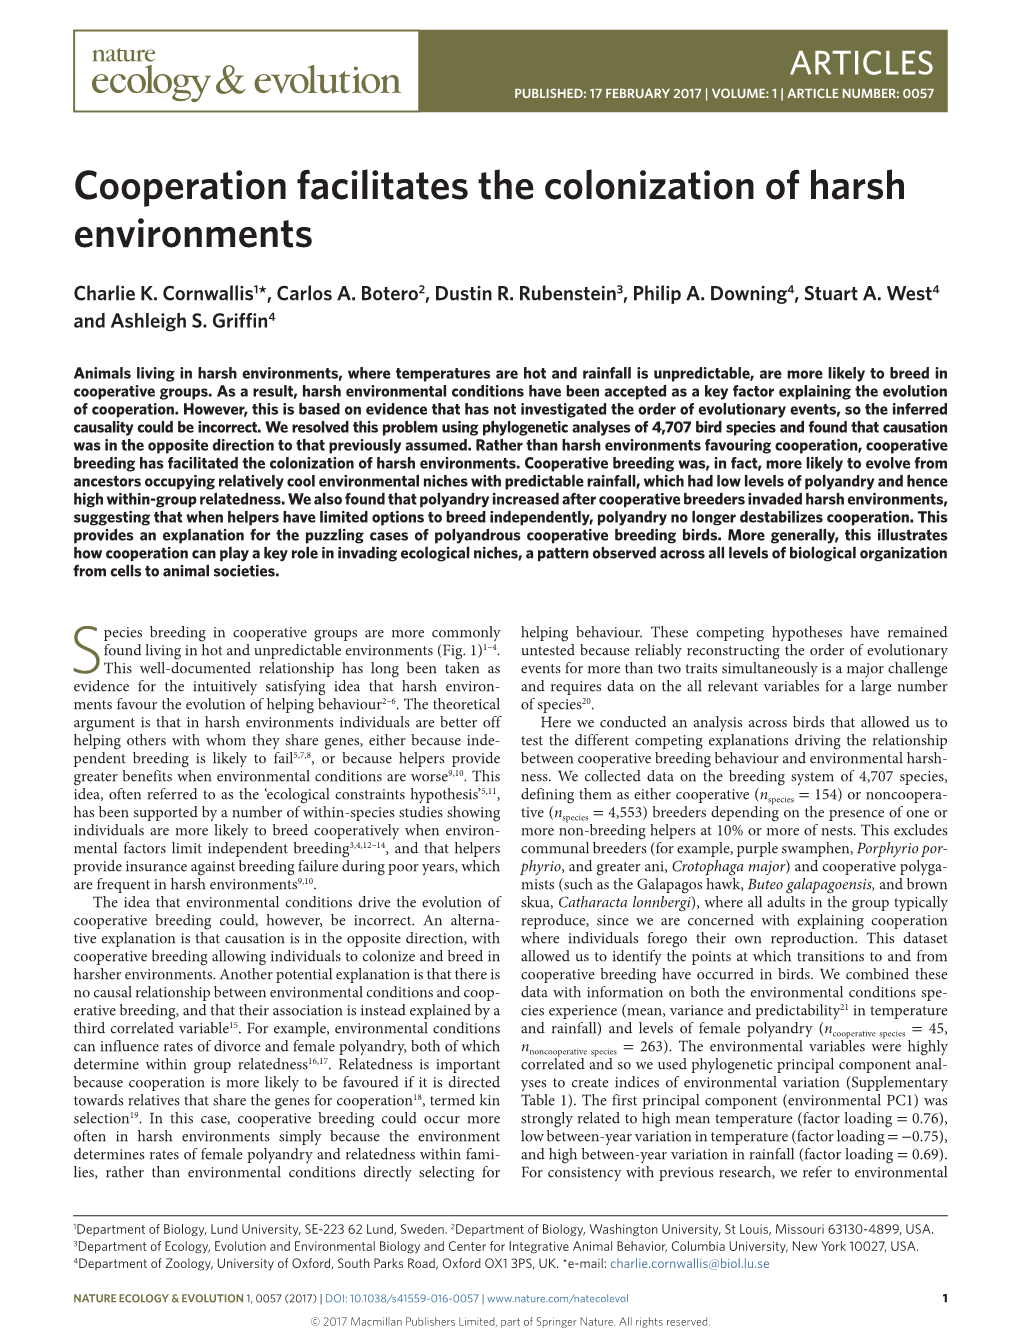 Cooperation Facilitates the Colonization of Harsh Environments